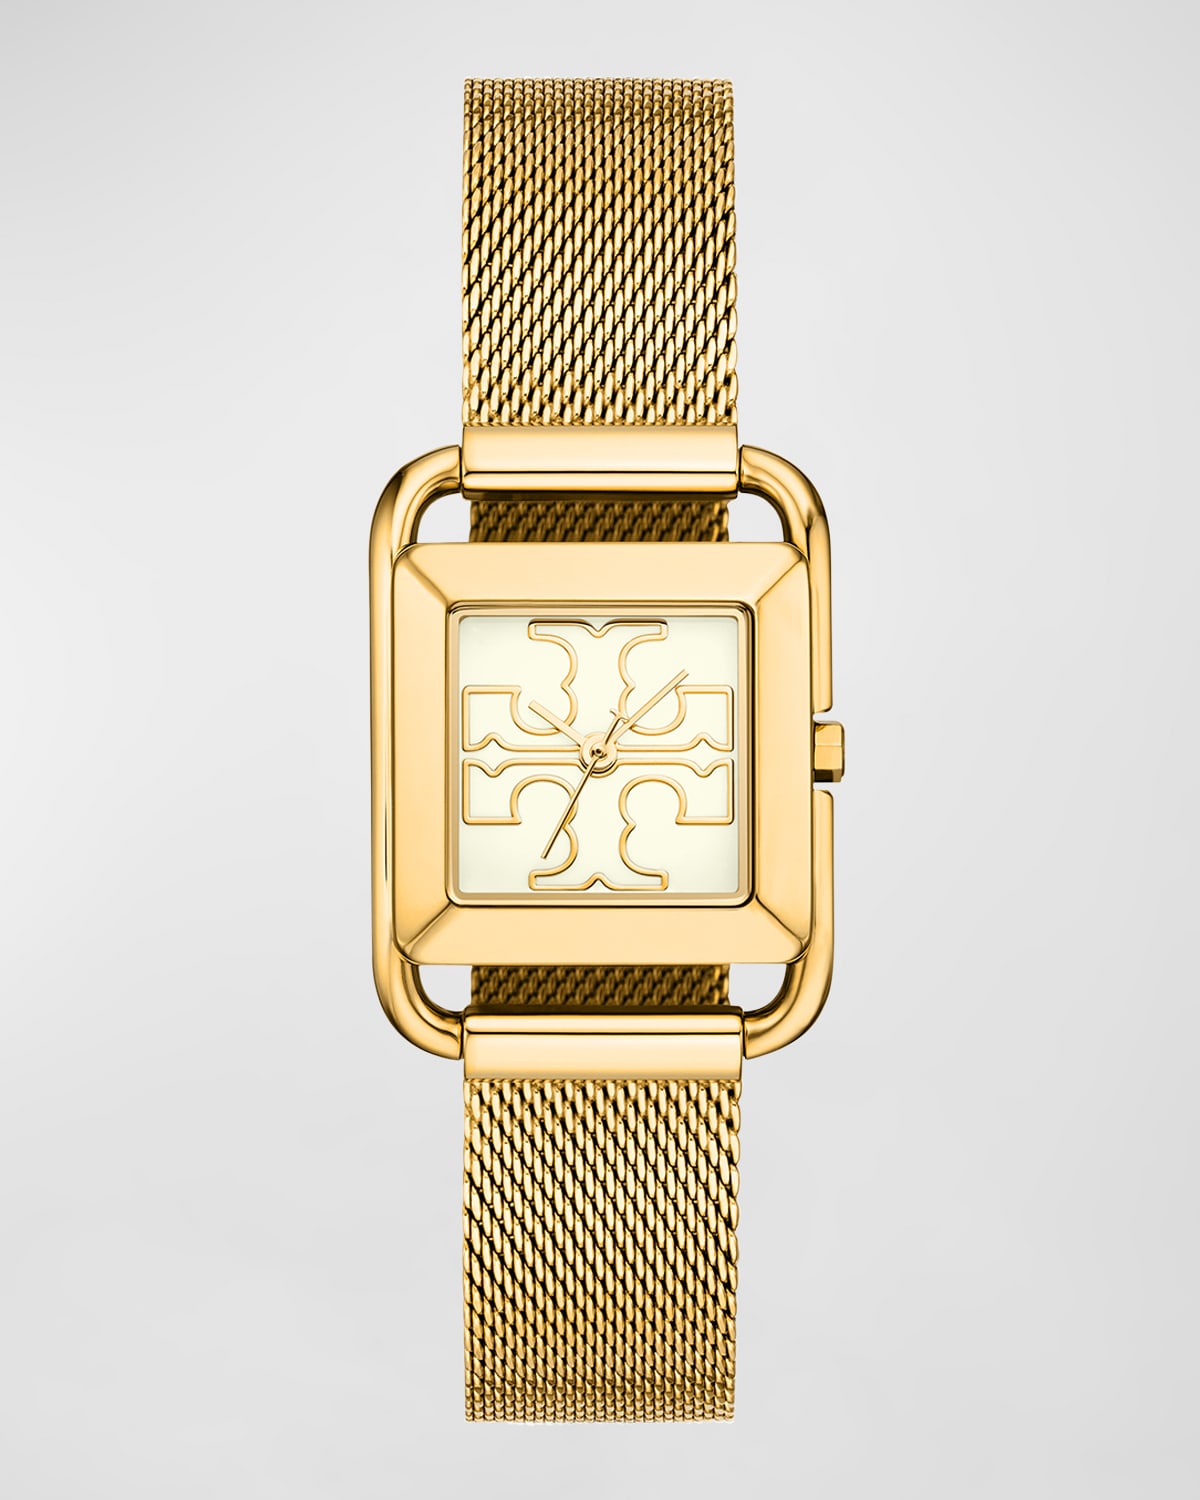 The Miller Square Stainless Steel Mesh Watch